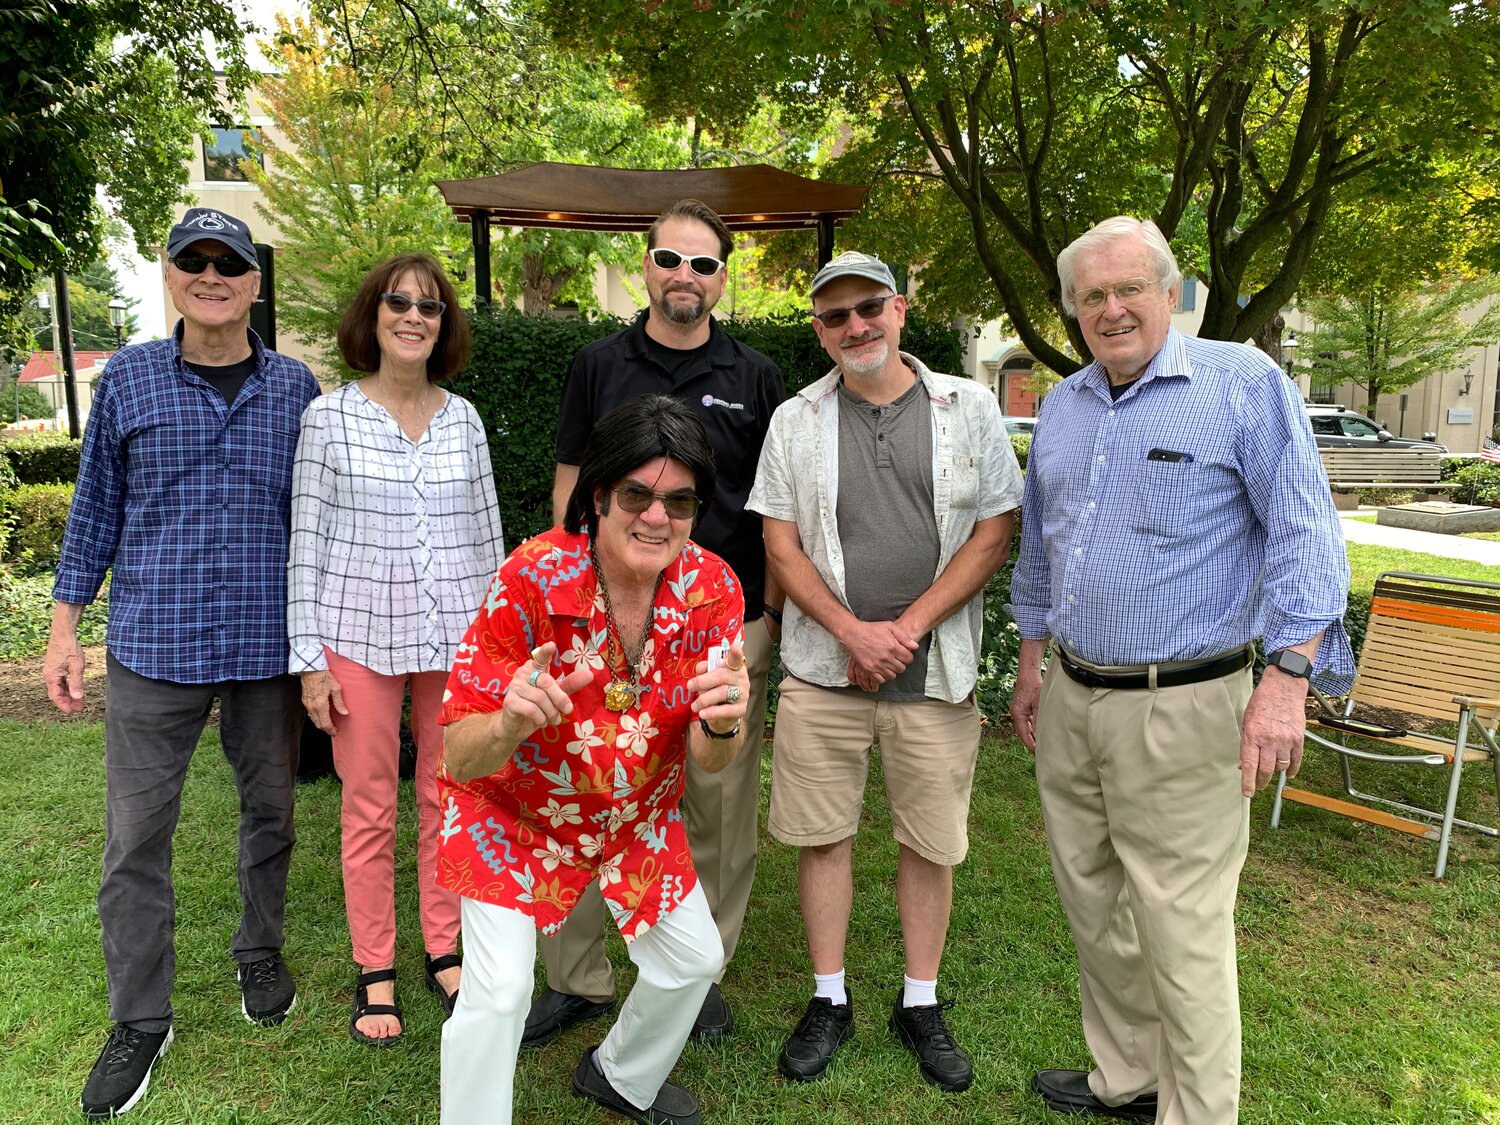 Art D’Angelo, Denise Gealer, Brad Sanders, Tom Brunt and Erik Fleischer, shown here with special guest John Ekey (aka “Elvis Pretzel”), are members of the Central Bucks Chamber of Commerce’s Bucks Fever Brown Bag-it with the Arts committee.